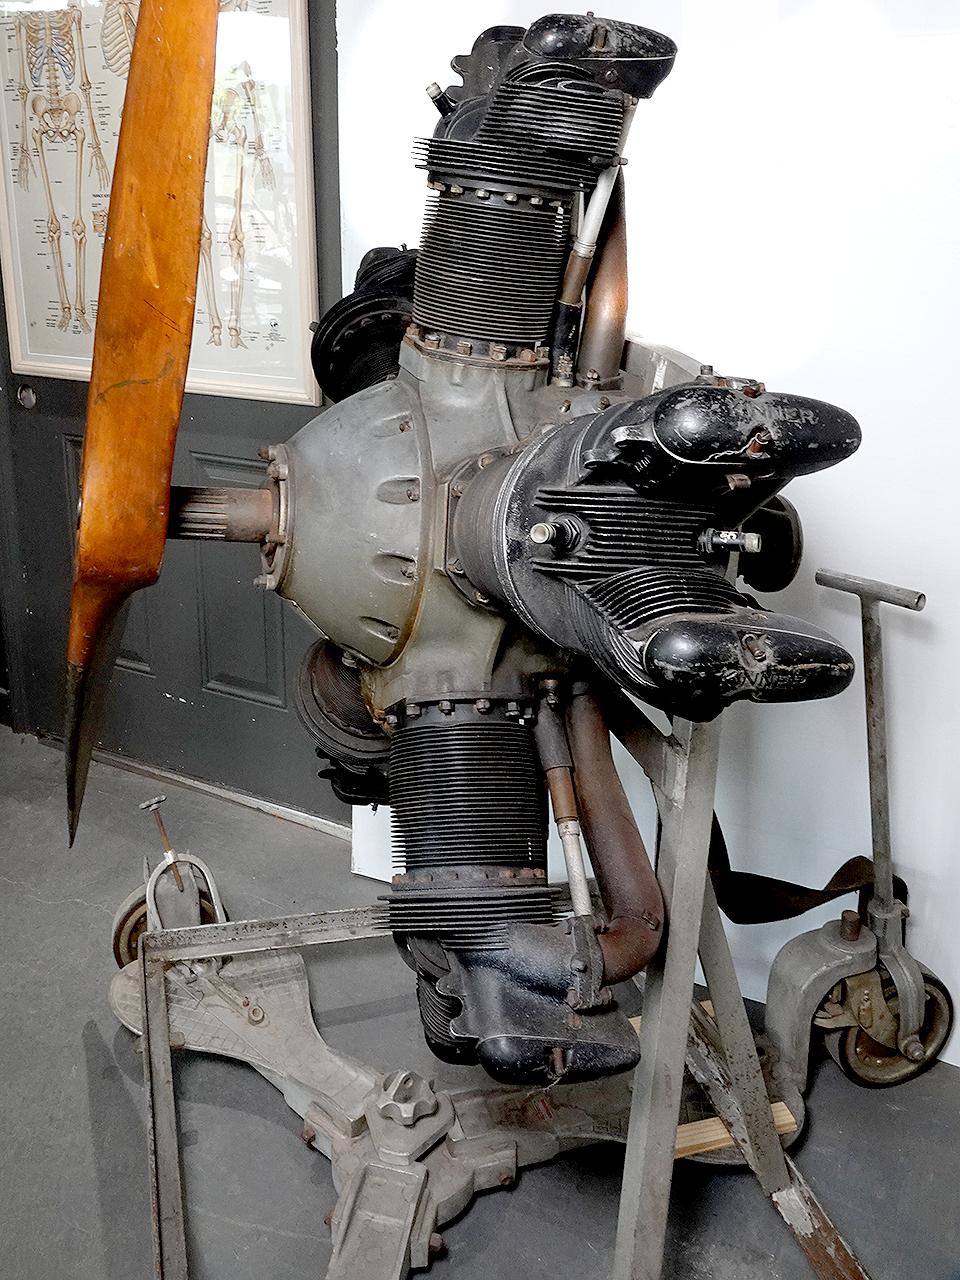 I believe this engine was never flown. During the war it was donated to a training school for teaching. In fact, what you see is the original factory paint. It comes with the wooden prop standing rack and steerable dolly.

The Kinner 5-cylinder